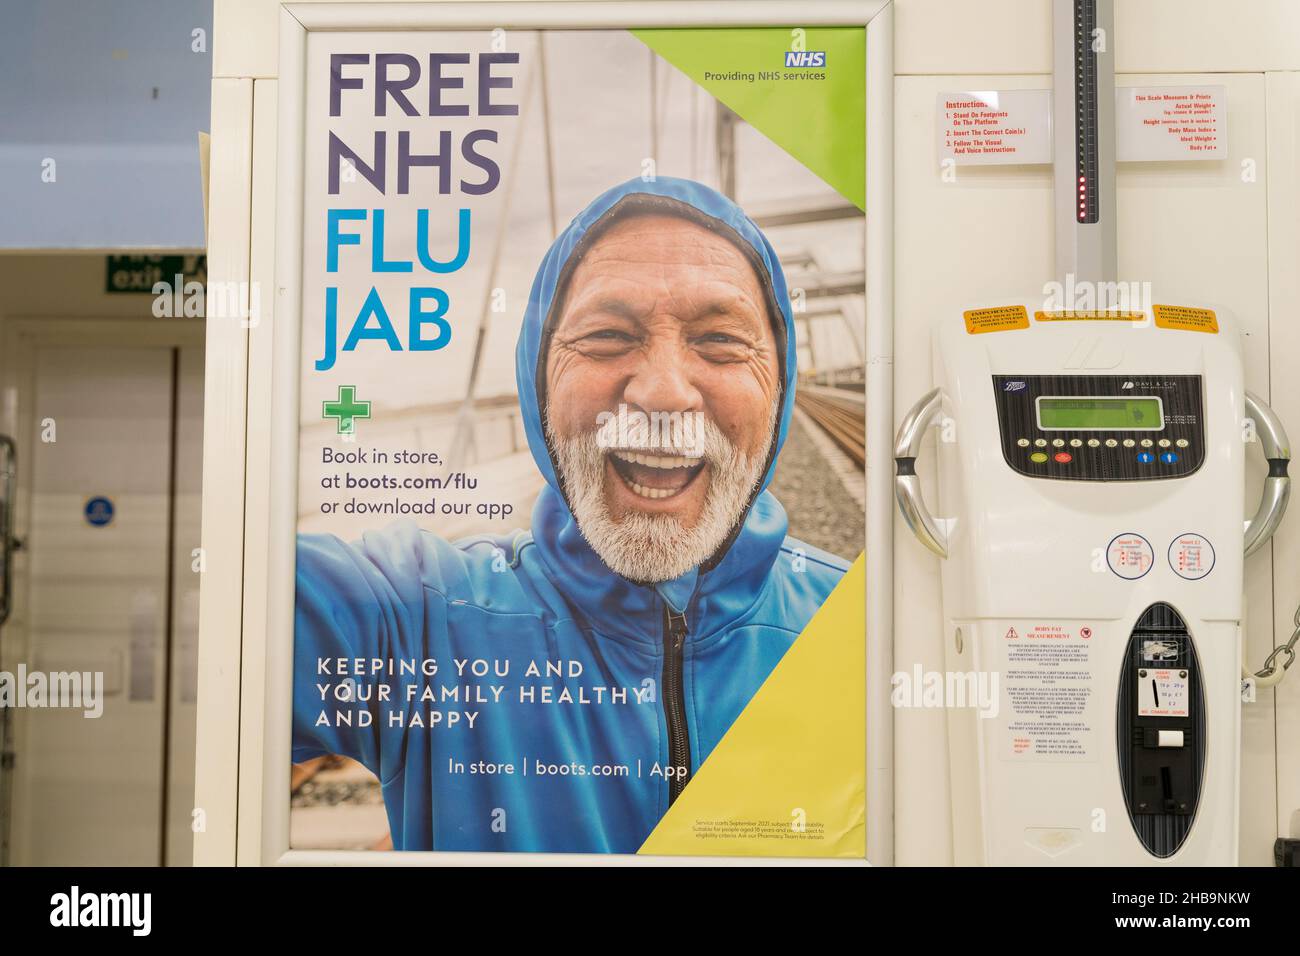 Giant instore poster for Free NHS FLU JAB at Boots Pharmacy London England Stock Photo